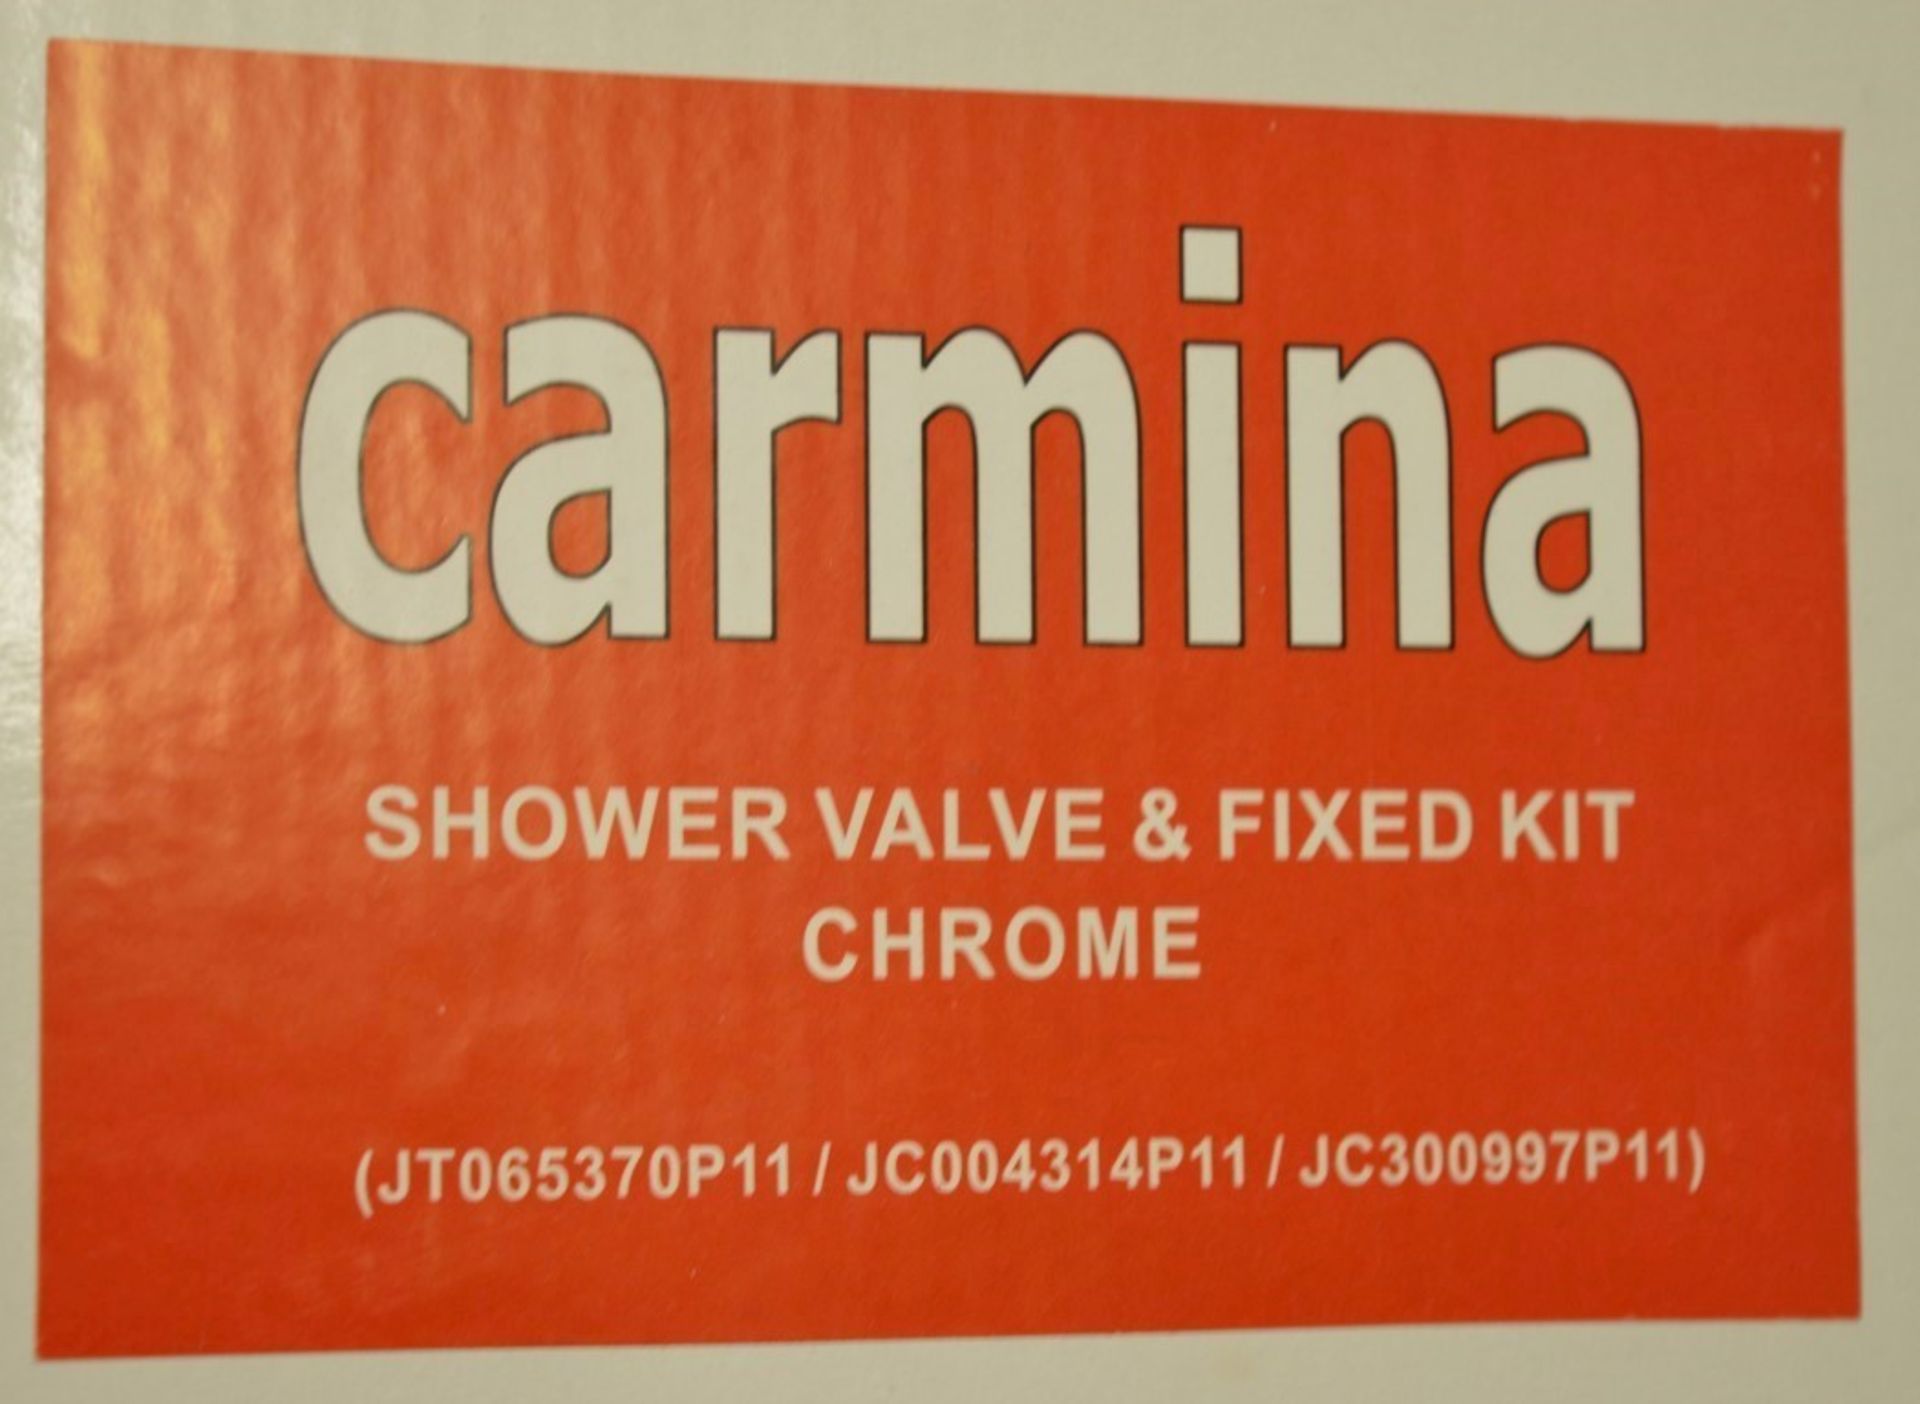 10 x Carmina Shower Valve Kits - Contains Chrome Shower Head, Fixed Arm and Manual Control - Brass - Image 3 of 13